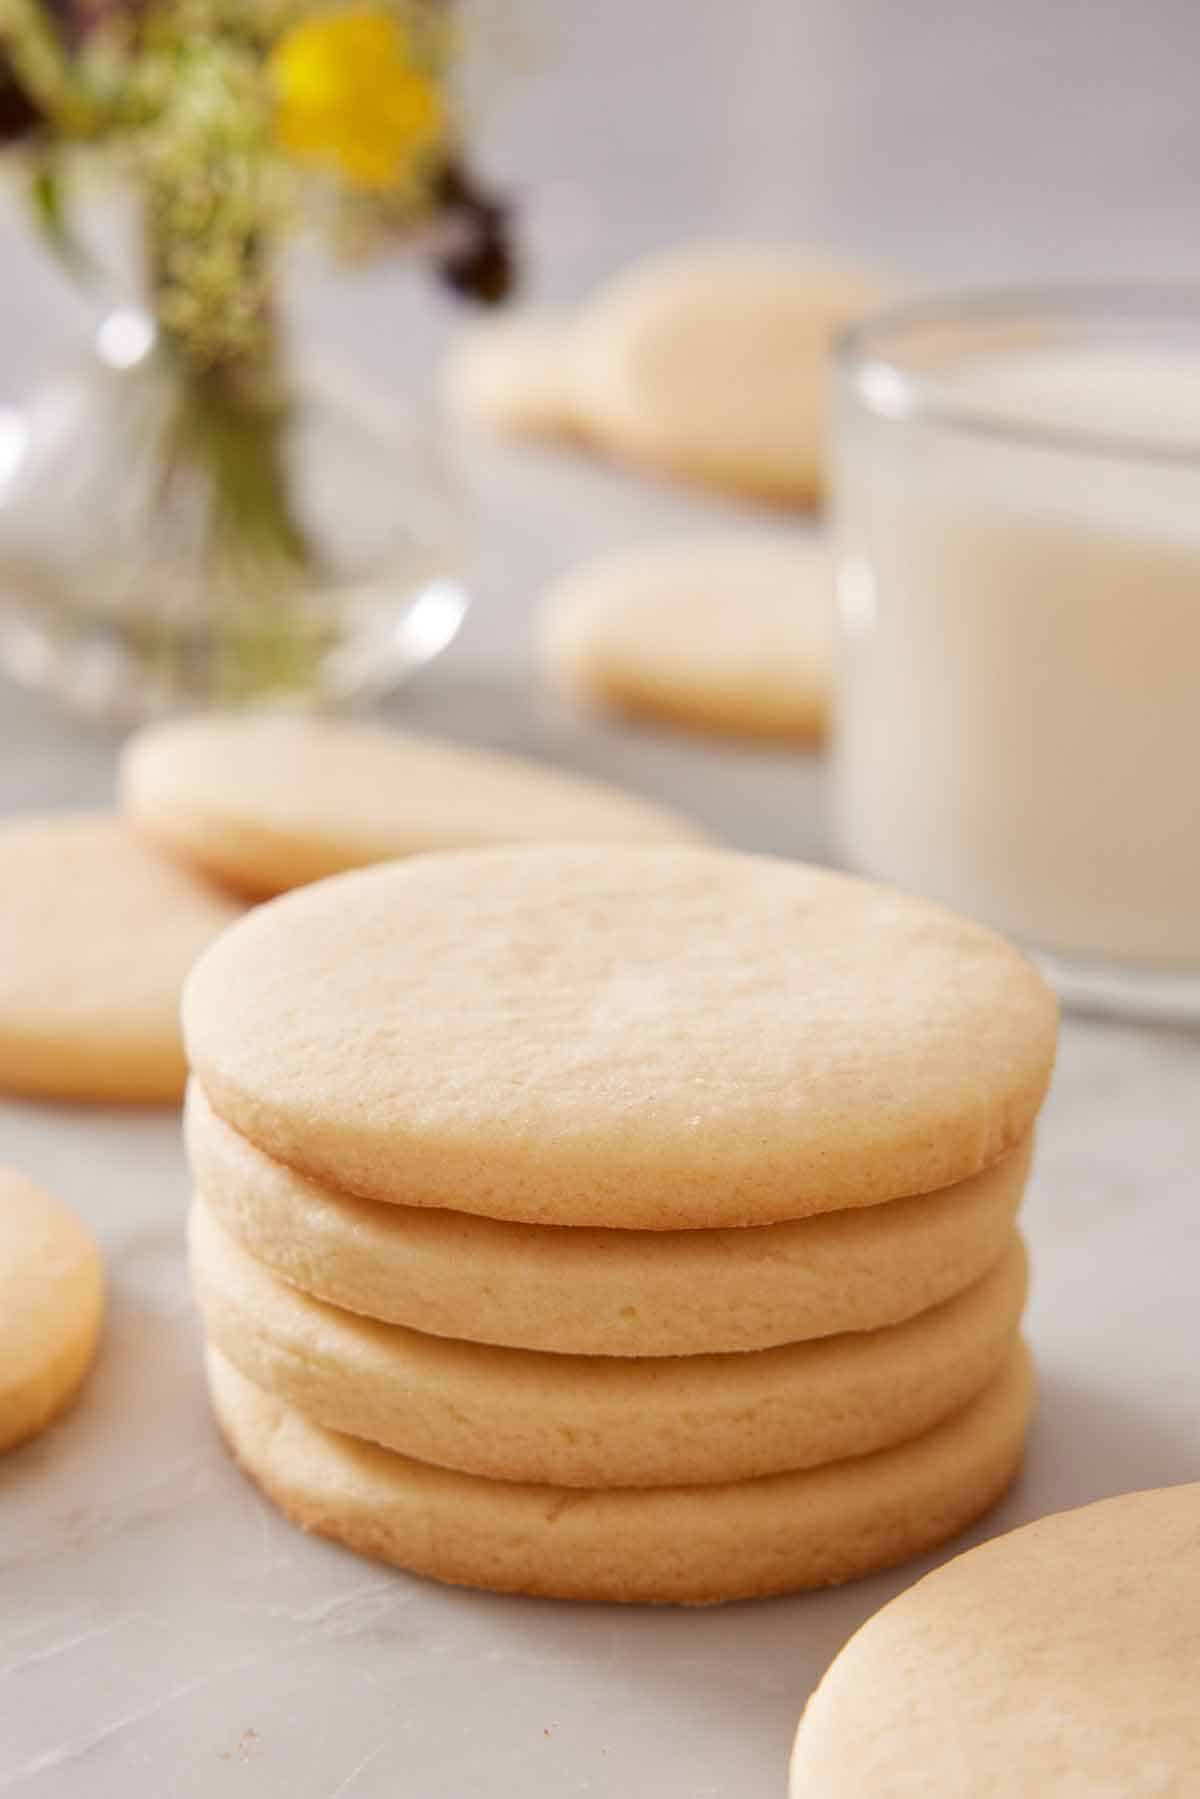 A stack of four sugar cookies with a glass of milk in the background and more cookies scattered around.